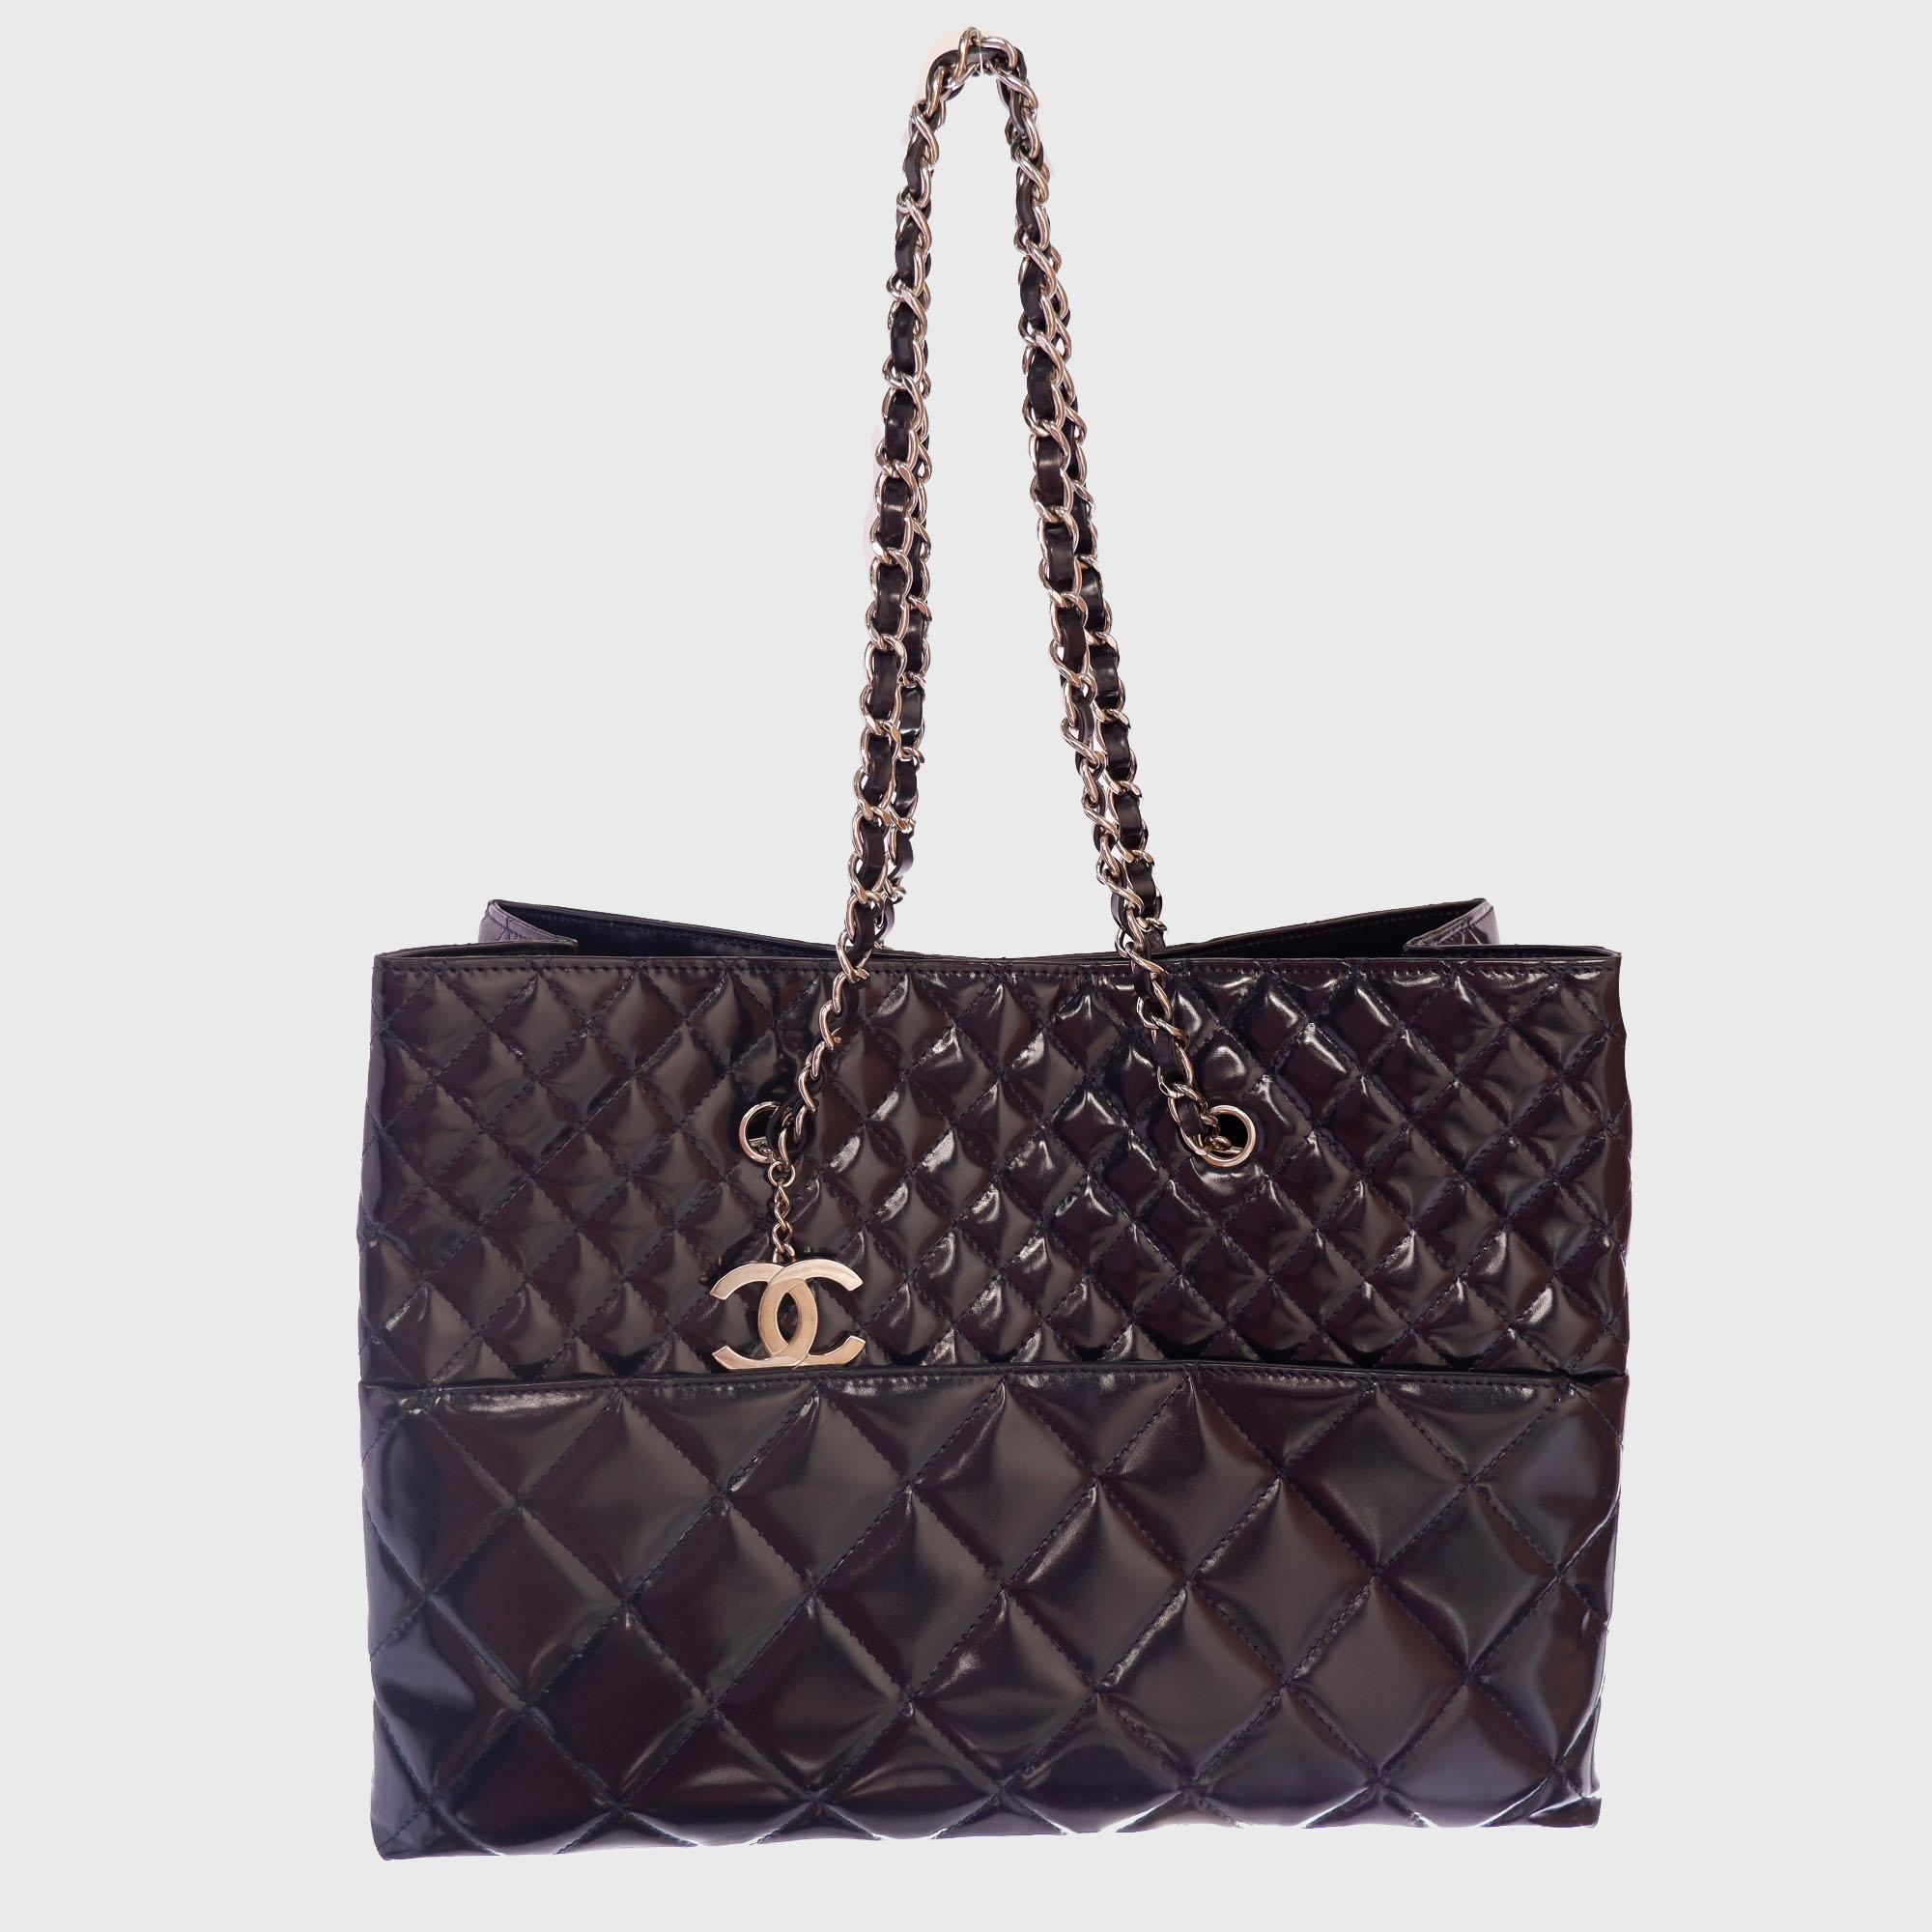 Crafted from black quilted patent leather, this timeless Chanel In The Business tote bag features dual woven-in leather chain straps, diamond quilted design, interlocking CC logo charm and silver-tone hardware accents. Its magnetic snap closure